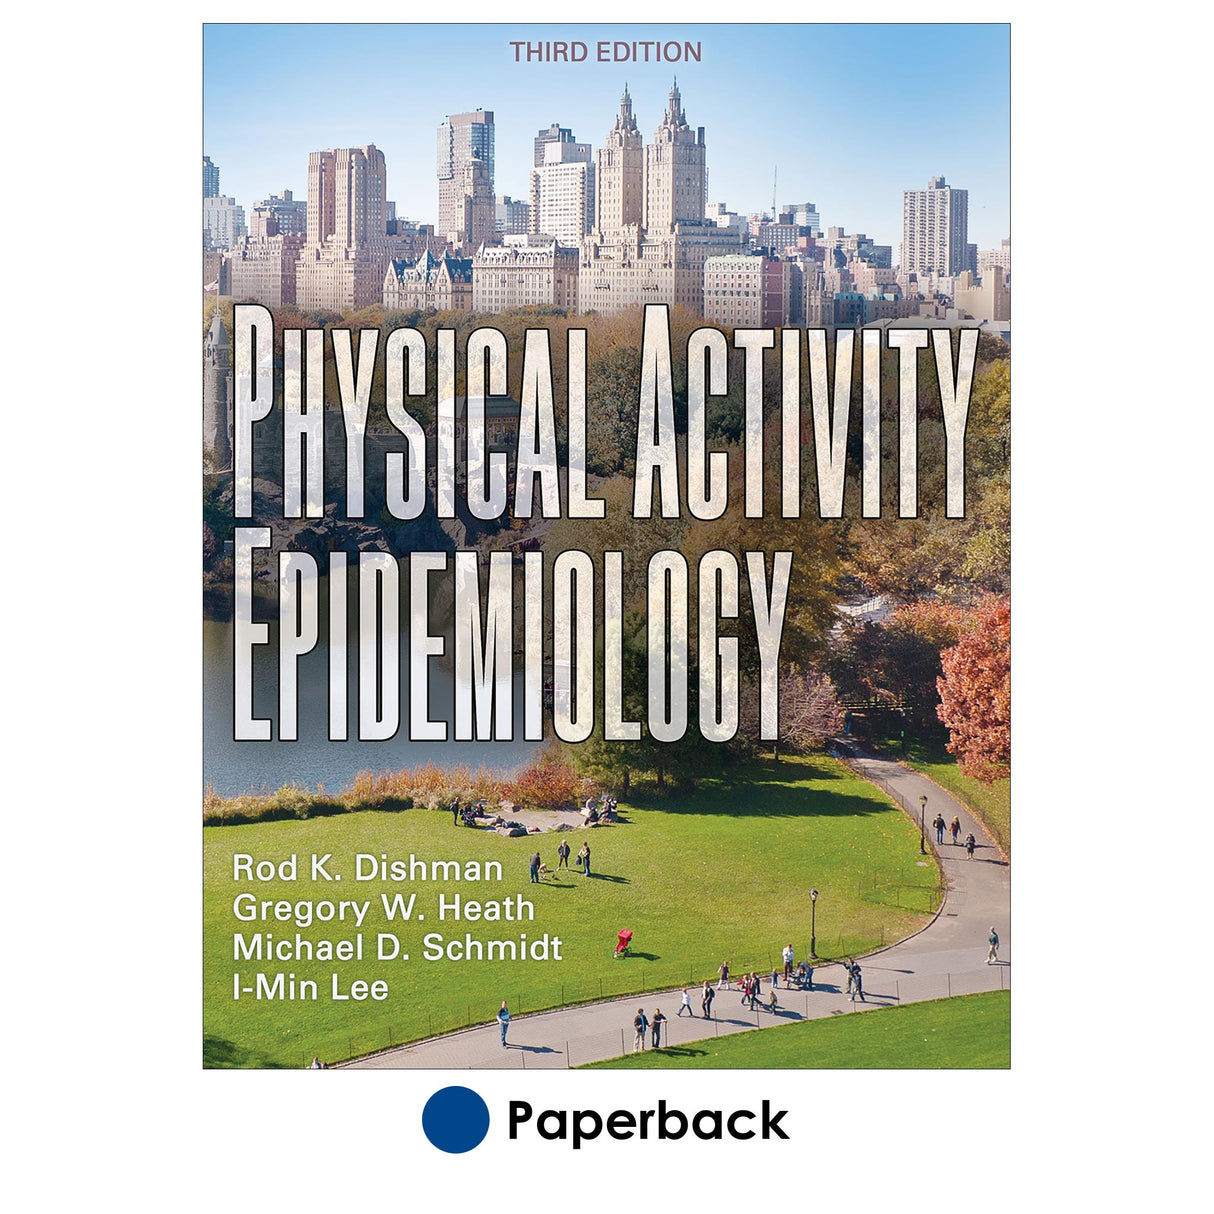 Physical Activity Epidemiology-3rd Edition